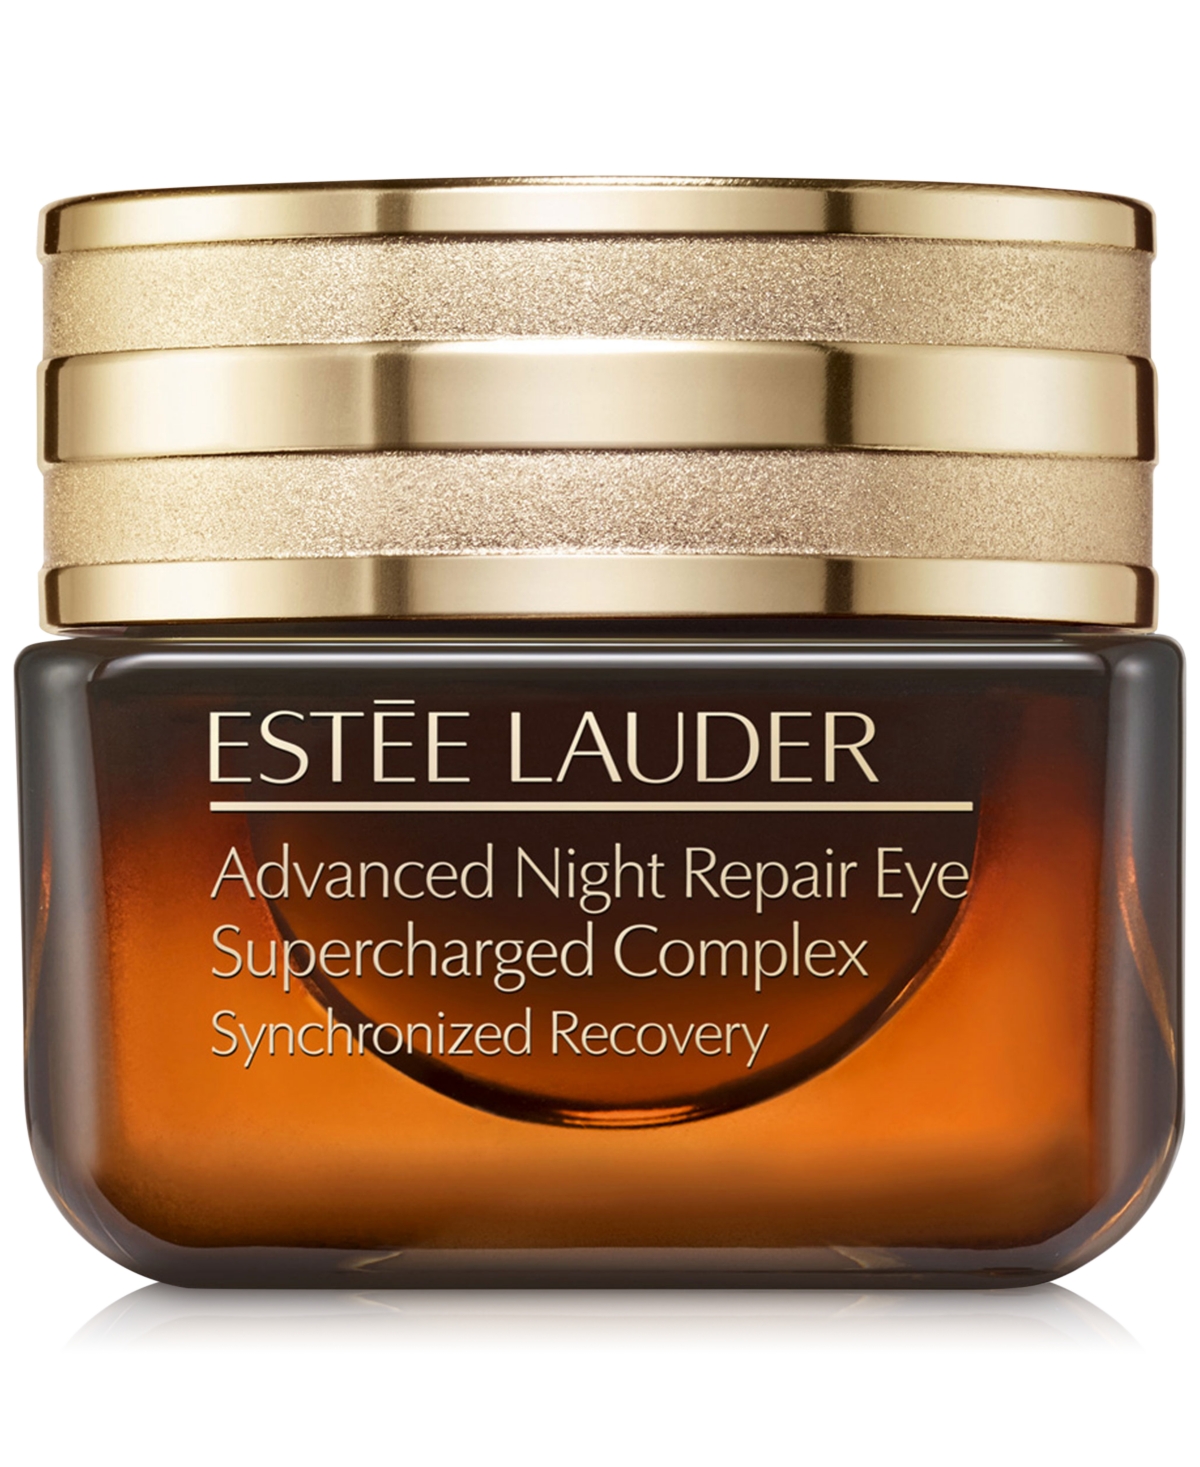 How Estée Lauder's Advanced Night Repair stayed a favourite for 38